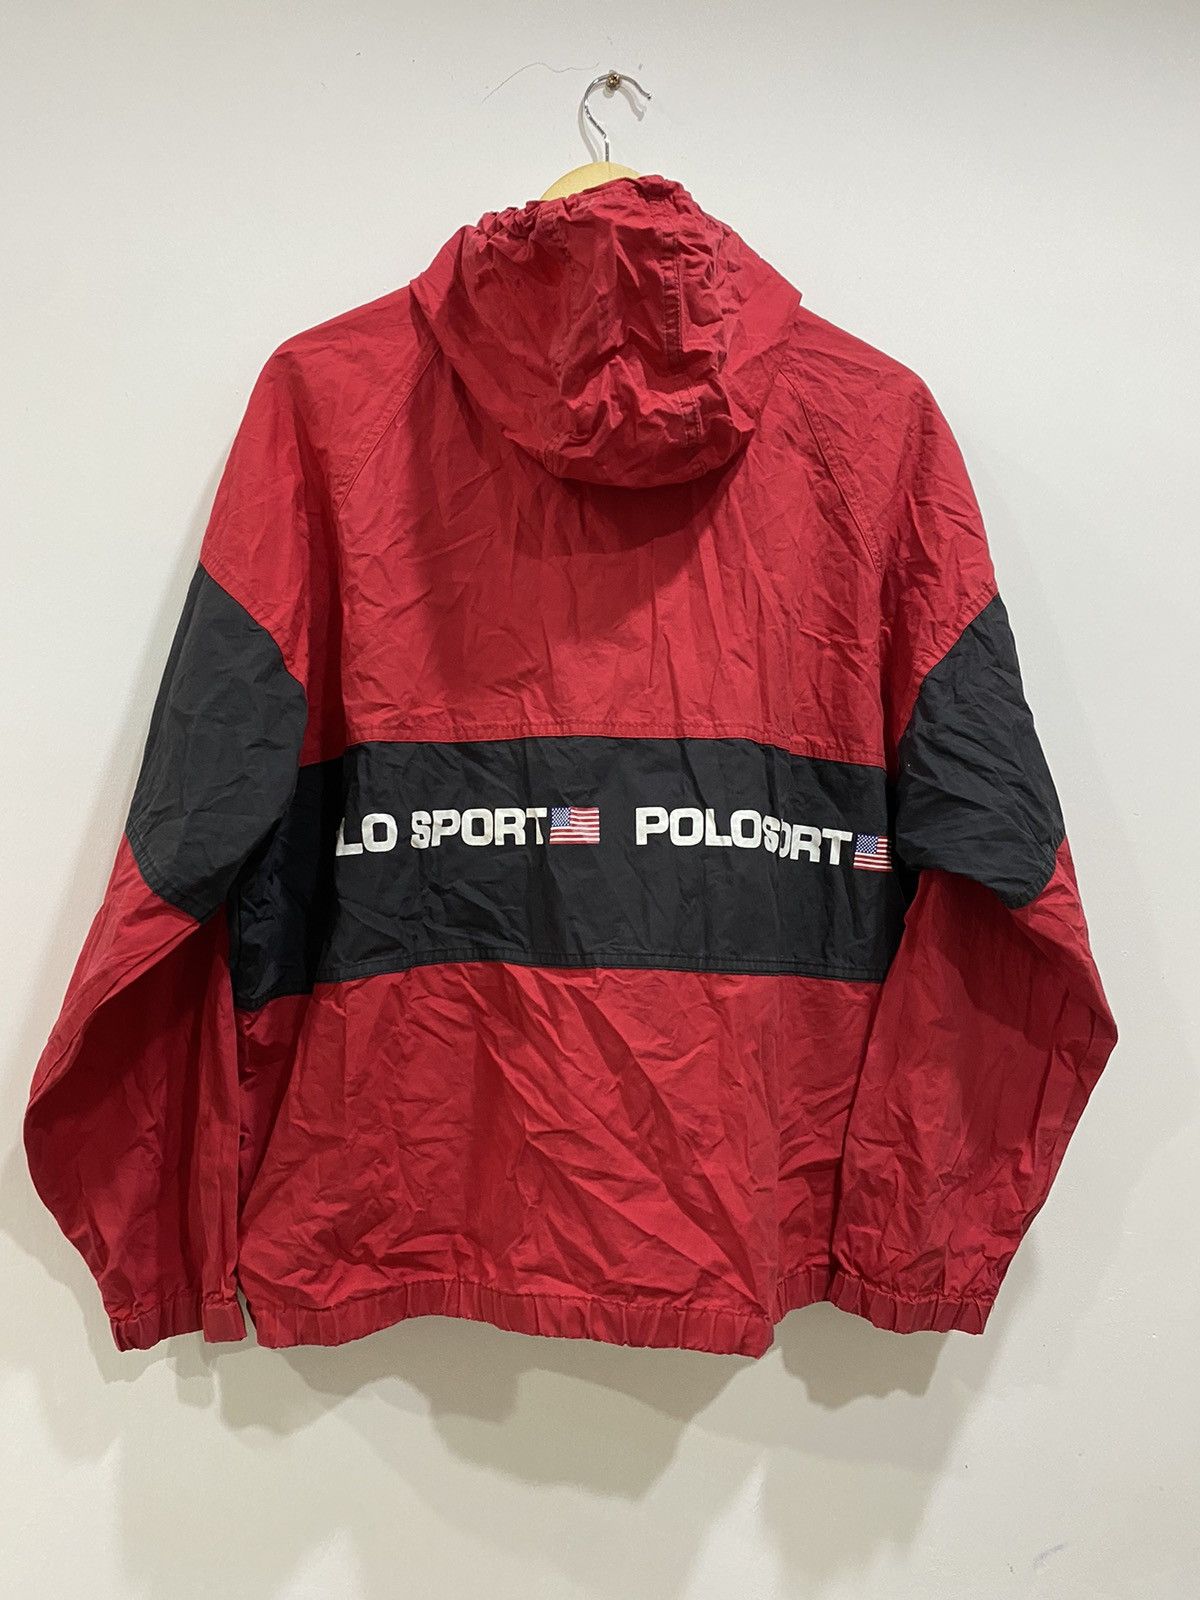 Vintage Polo Sport Ralph Lauren Spell Out Jacket - 17